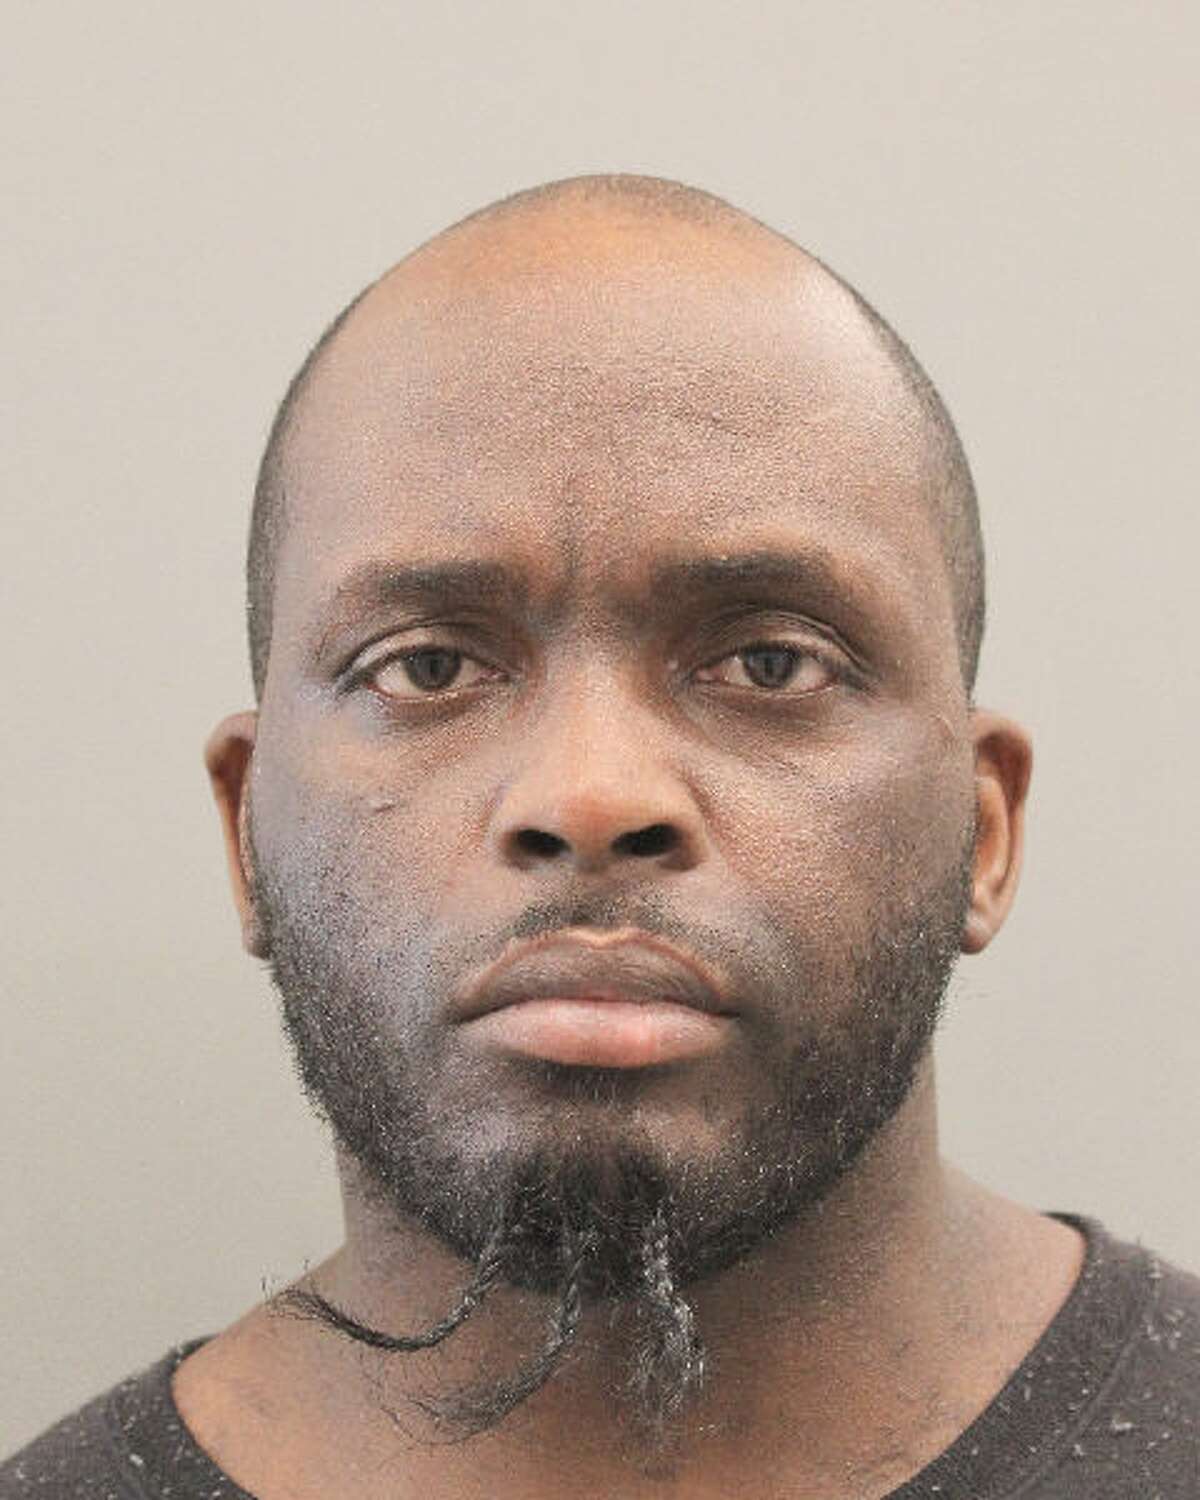 Teddy Geer, a 36-year-old Florida man traveling back from Houston, was sentenced to 40 years for stomping a man to death who he thought robbed his $10.